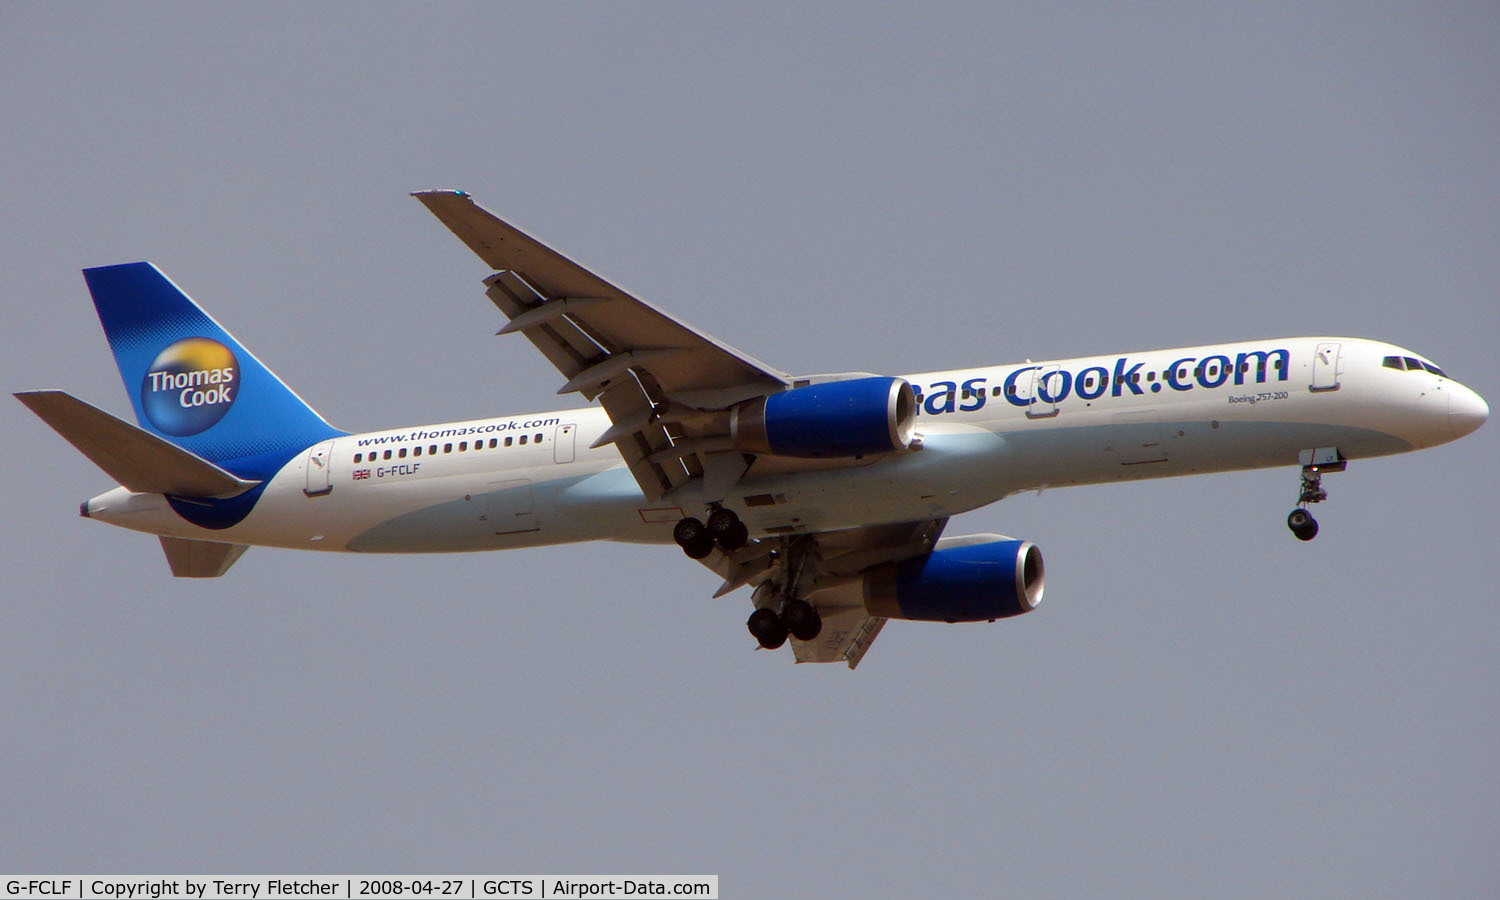 G-FCLF, 1999 Boeing 757-28A C/N 28835, Thos Cook B757 on Finals to Tenerife South Runway 08